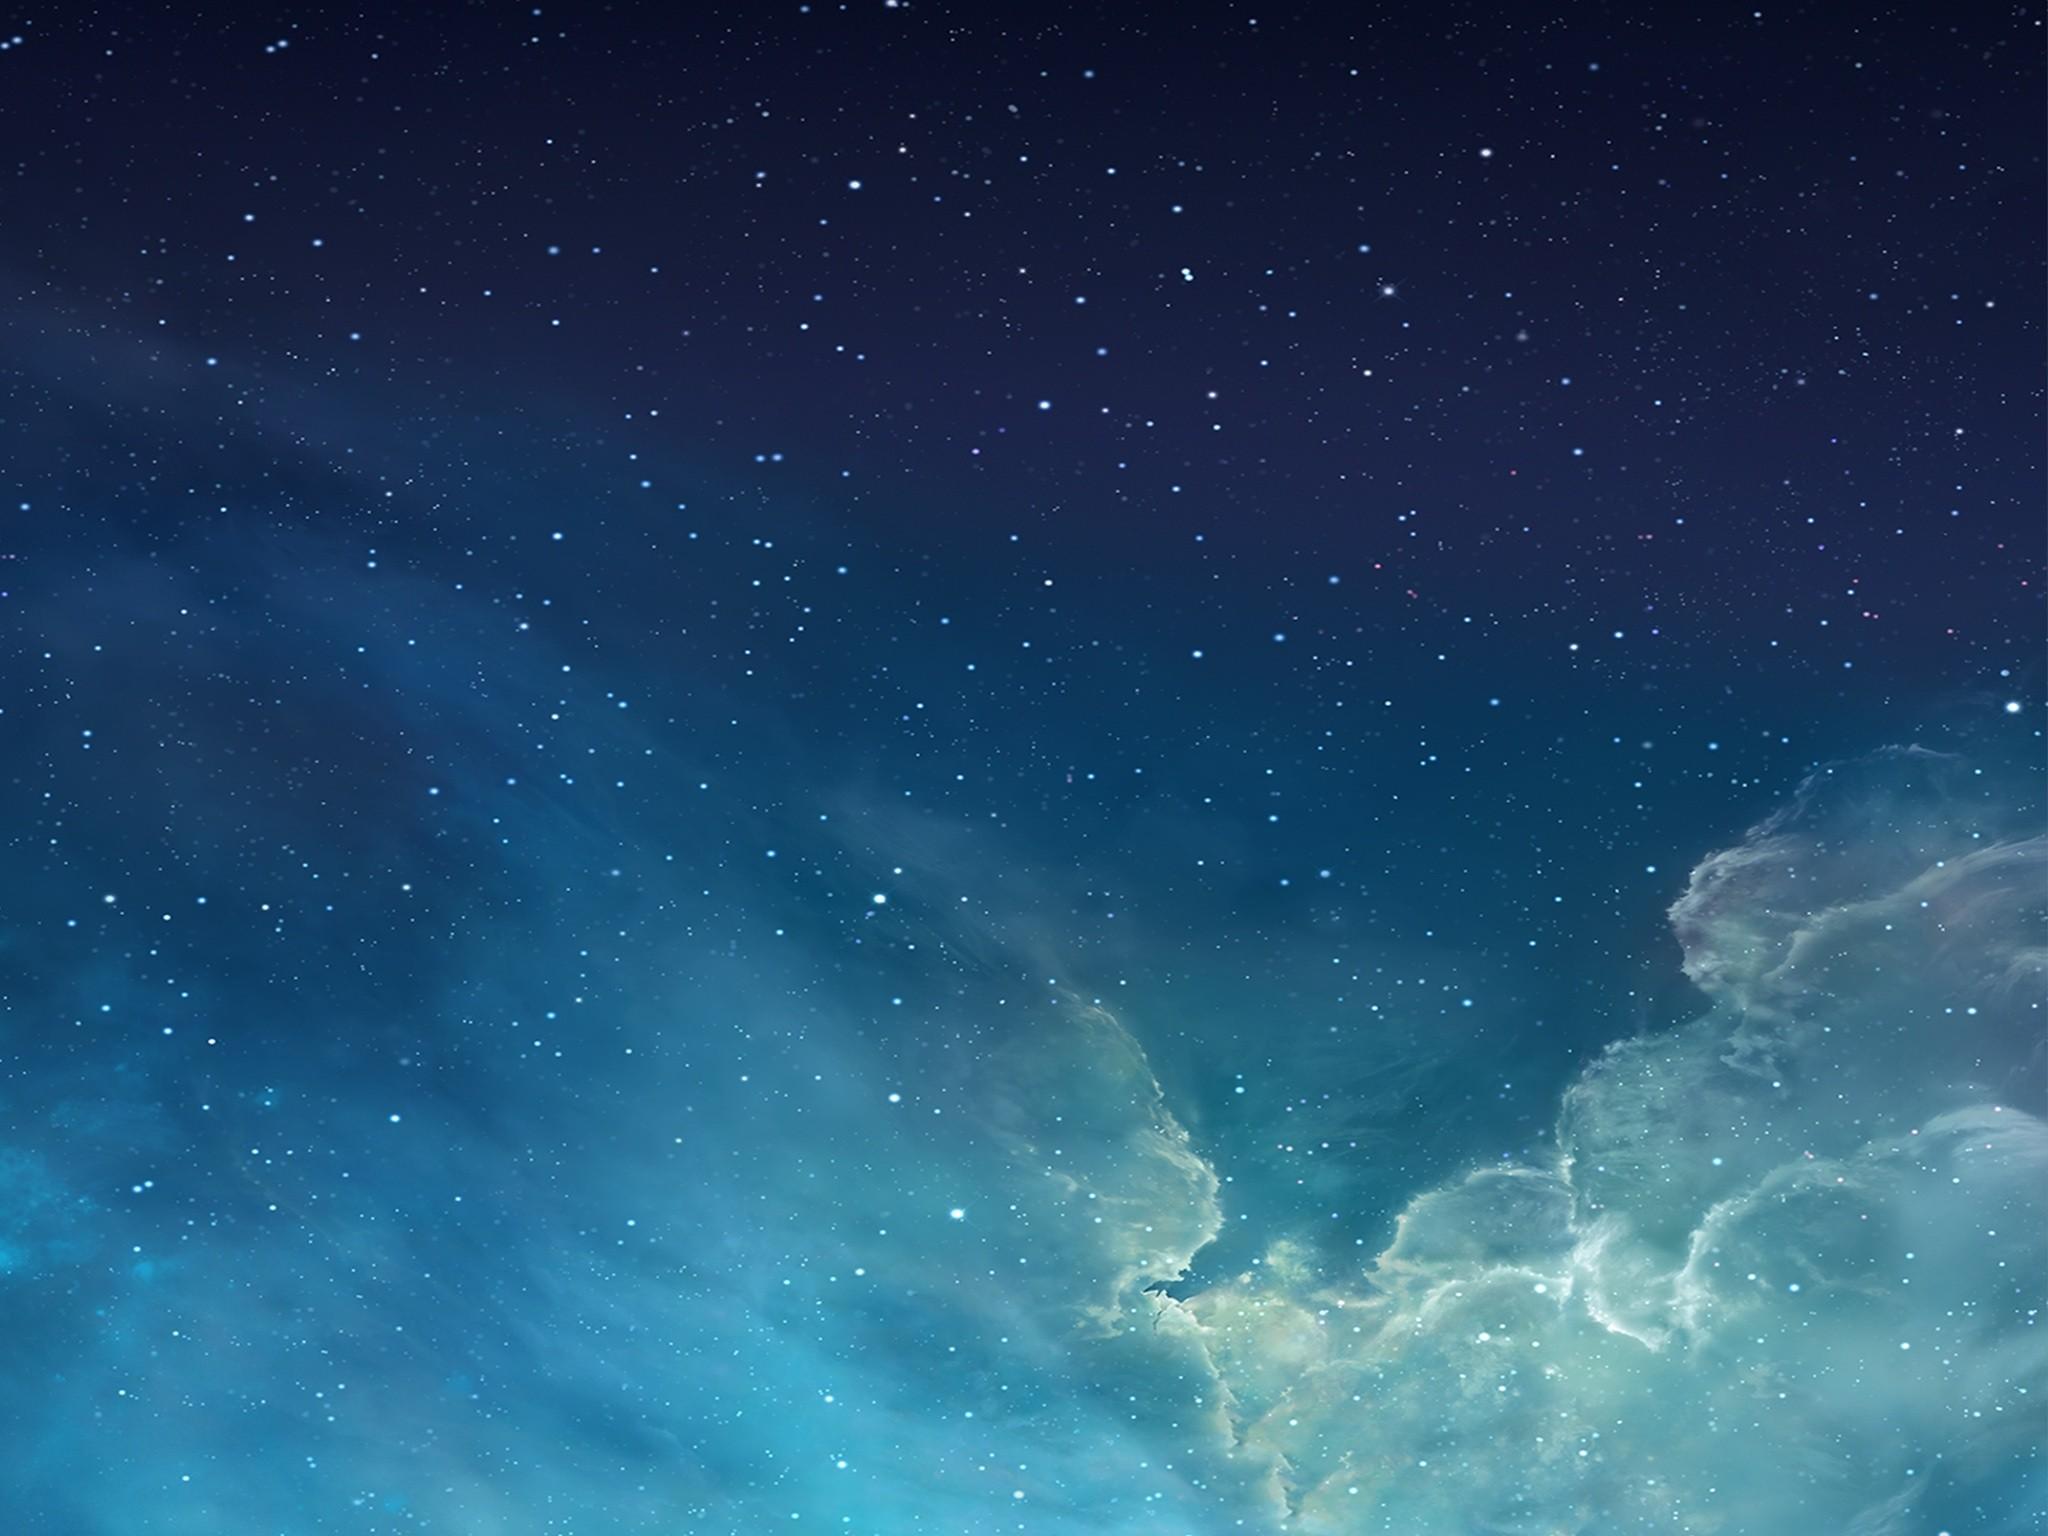 Galaxy Wallpaper For iPad Air Download Amazing Artwork Background